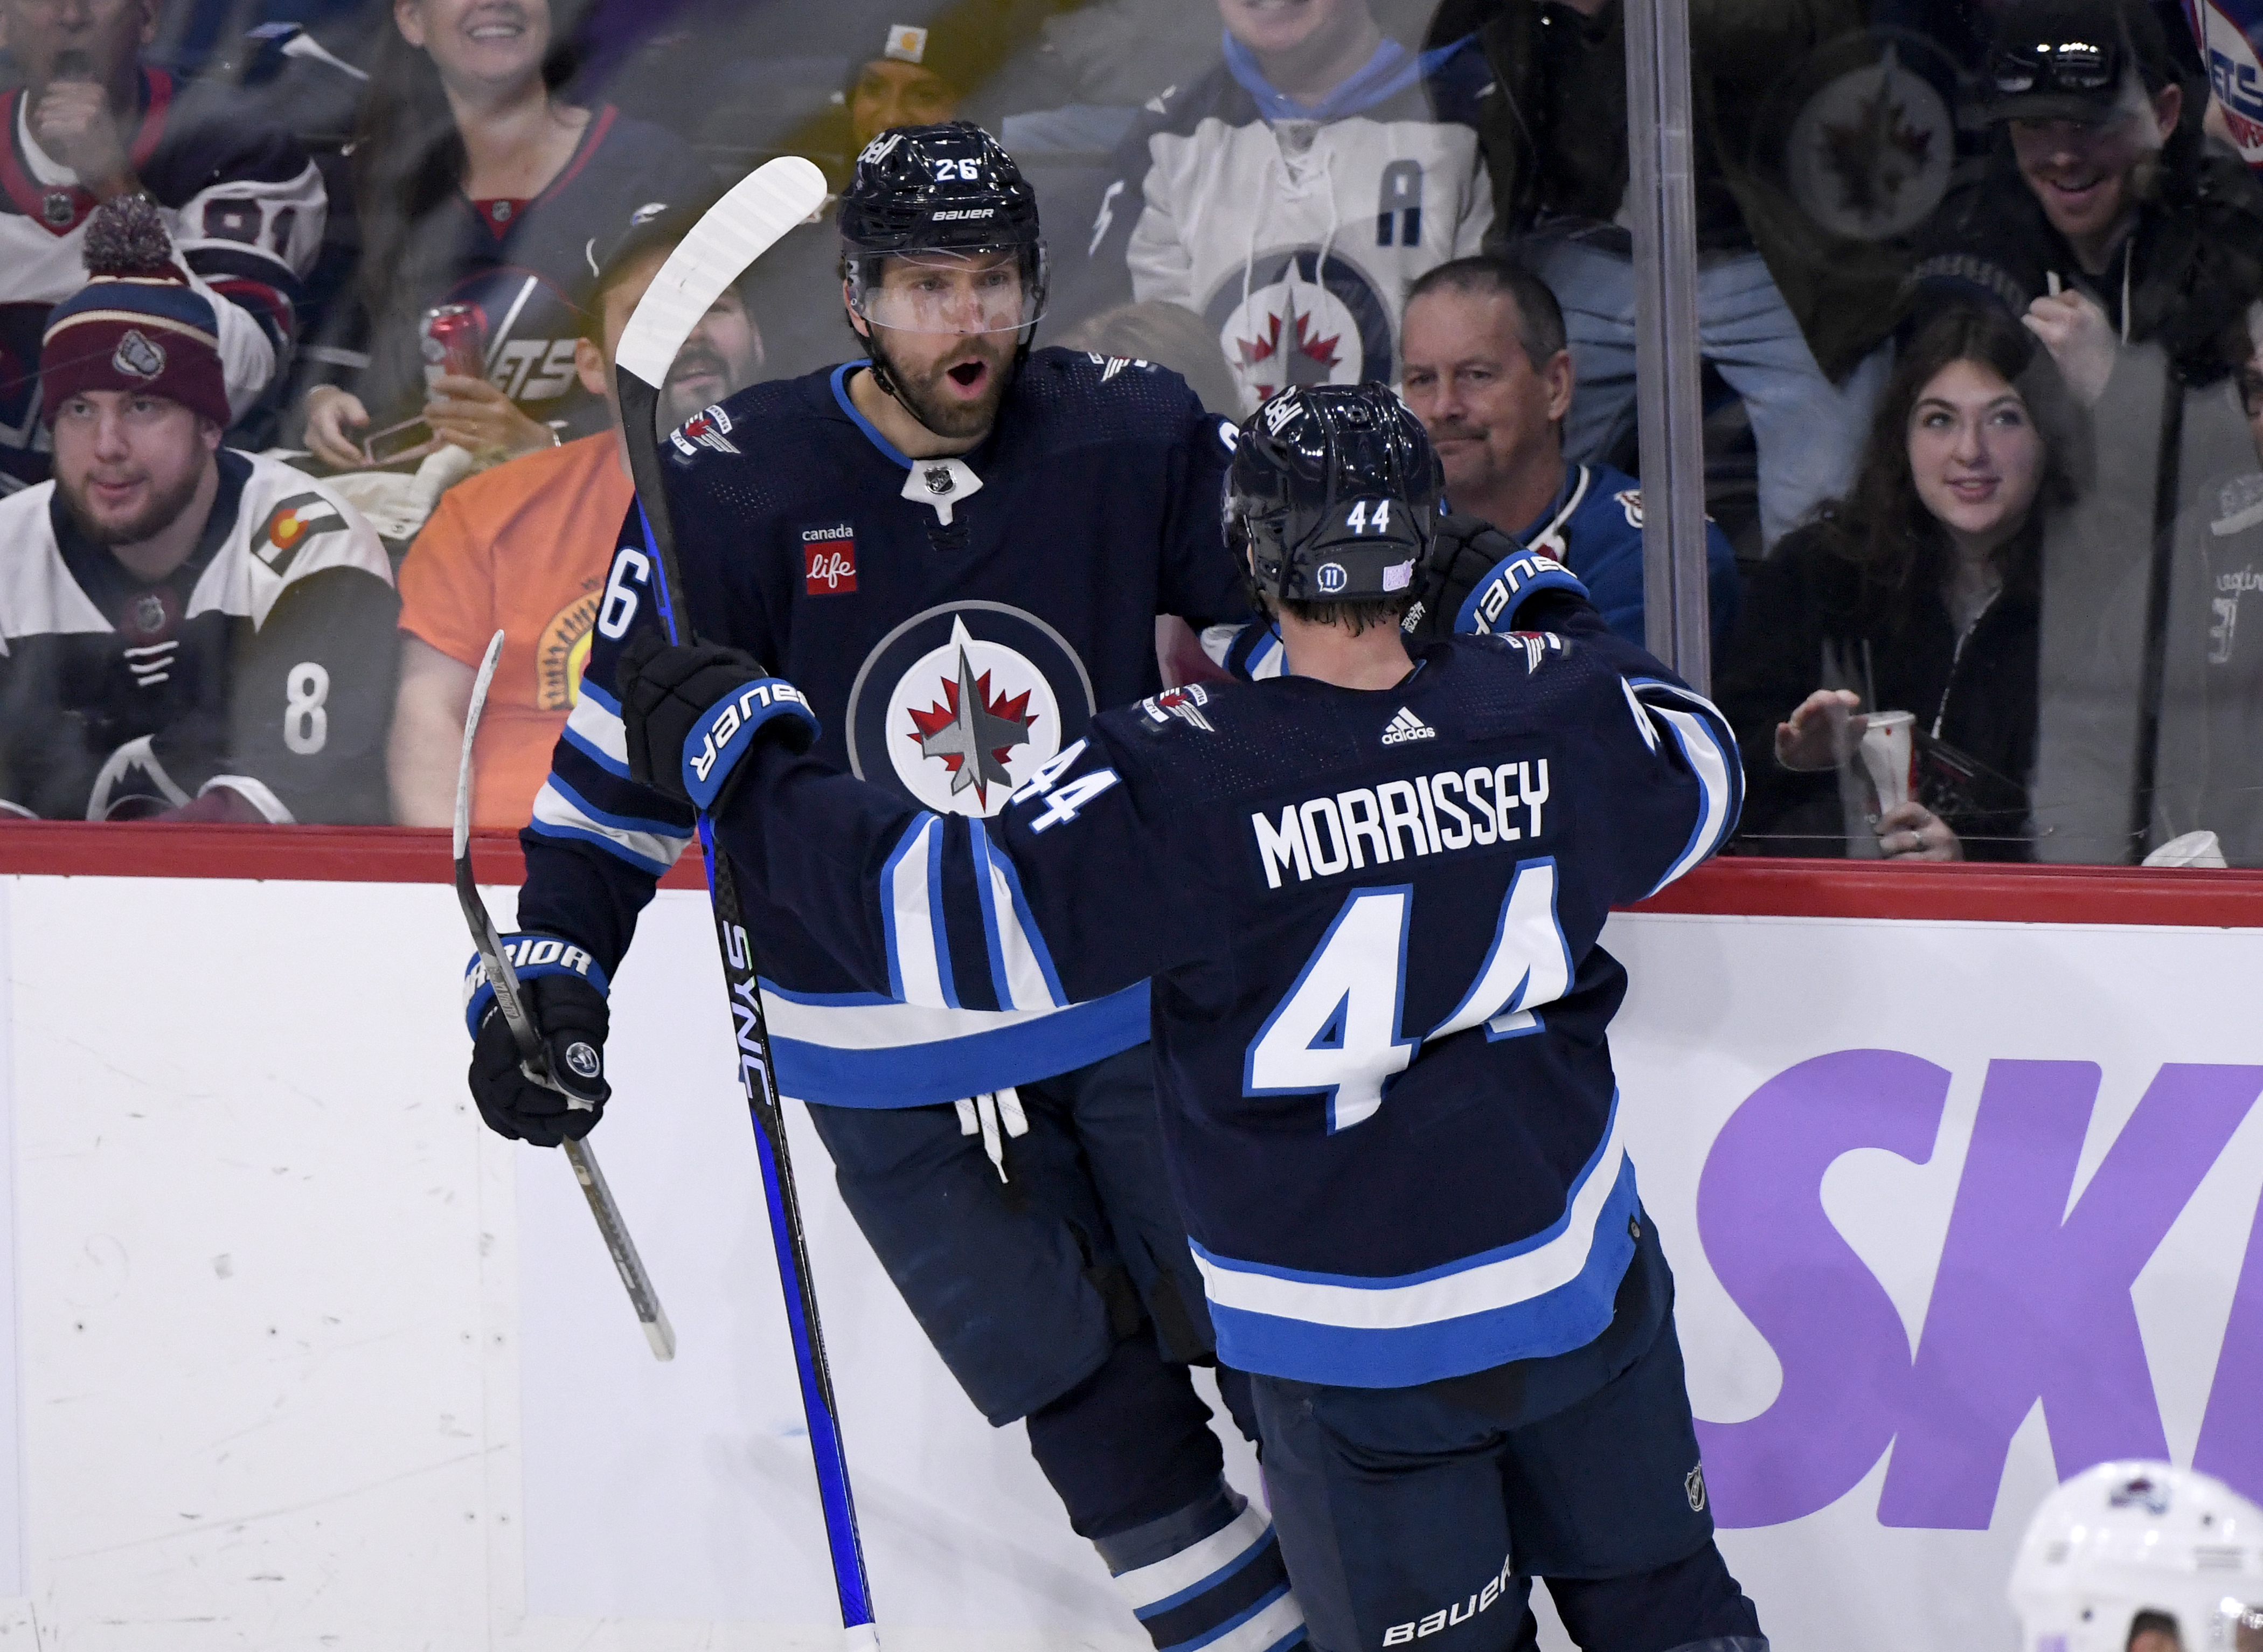 Hellebuyck makes 25 saves, Jets shut out Avalanche